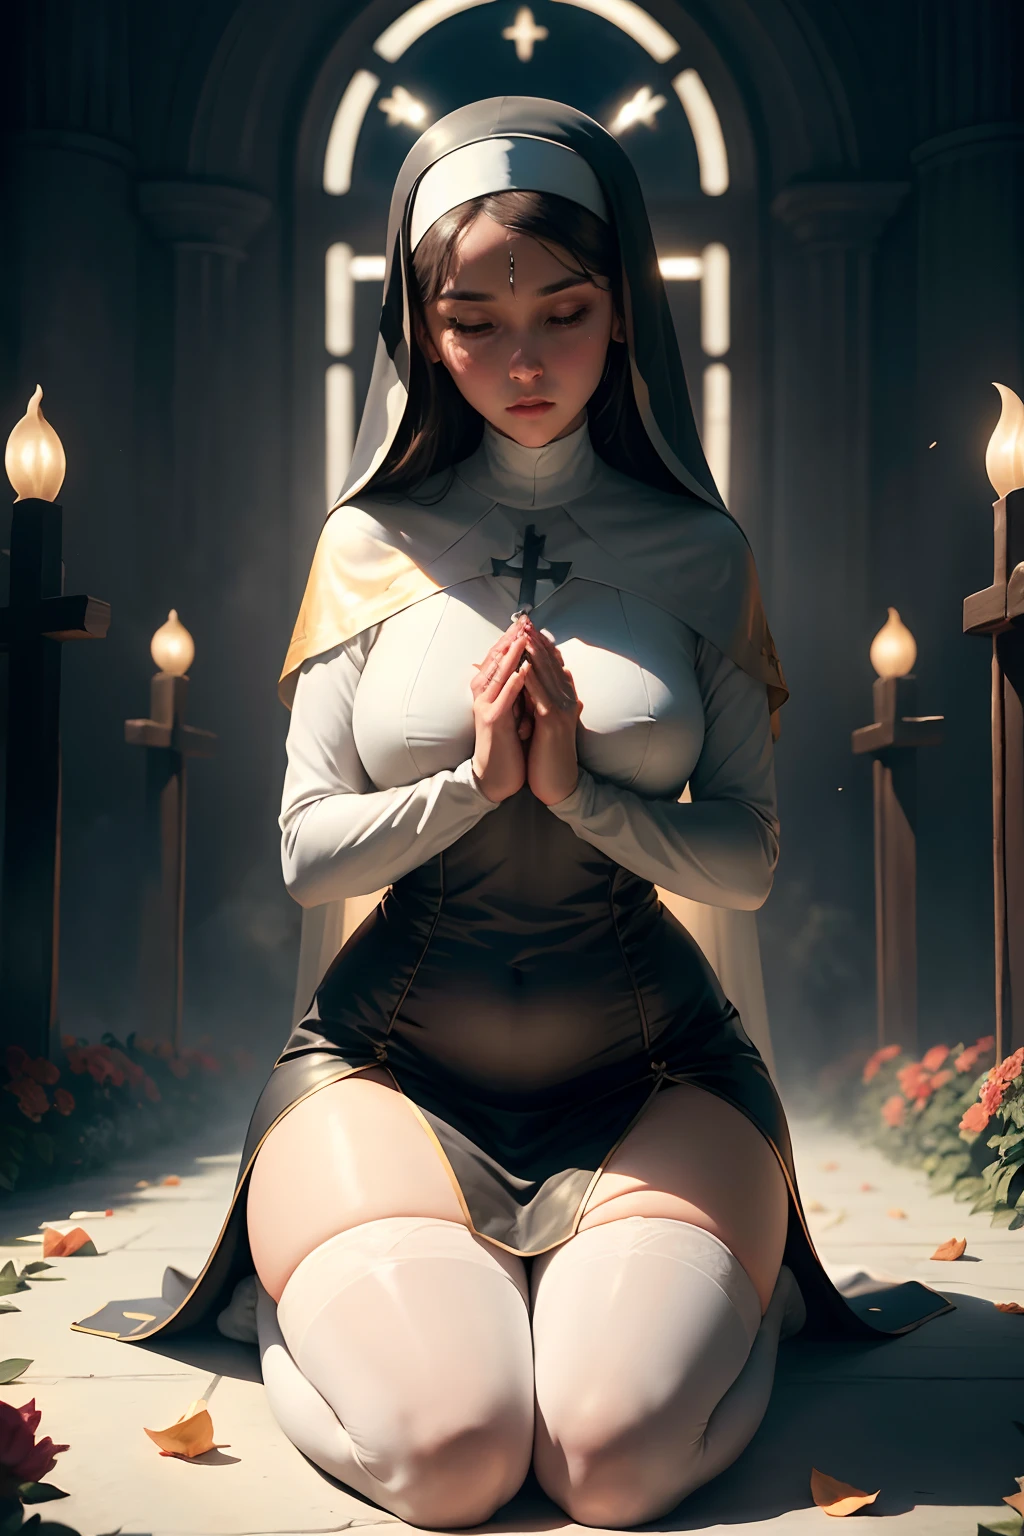 lewd nun，A ray of light shines down，Light and shadow details，Camera perspective，slimfigure，8K，tmasterpiece，Kneel down with your hands folded in prayer，crosses，flowerbed，holy，Cold and glamorous，Bare thighs，white stockings --auto